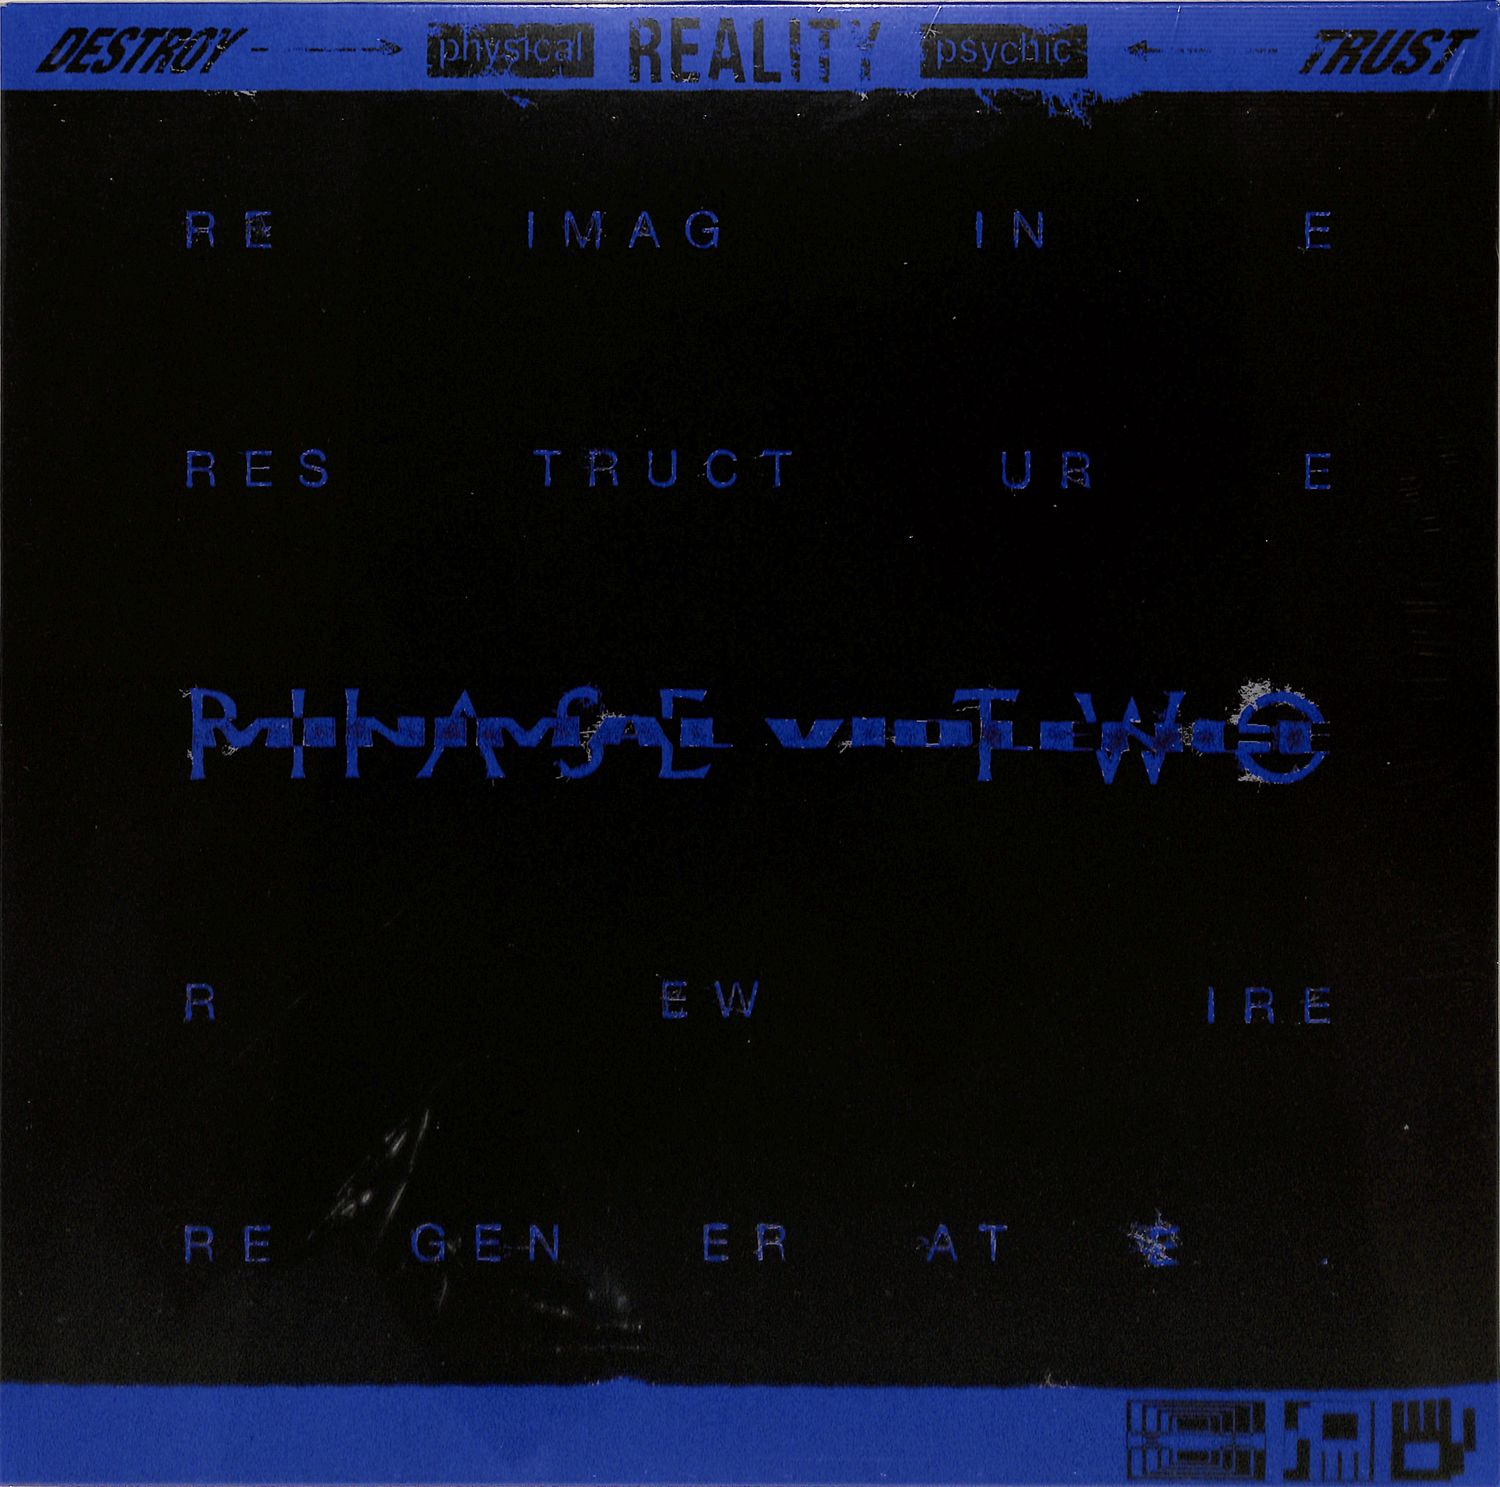 Minimal Violence - DESTROY ---> PHYSICAL REALITY PSYCHIC <--- TRUST PHASE TWO